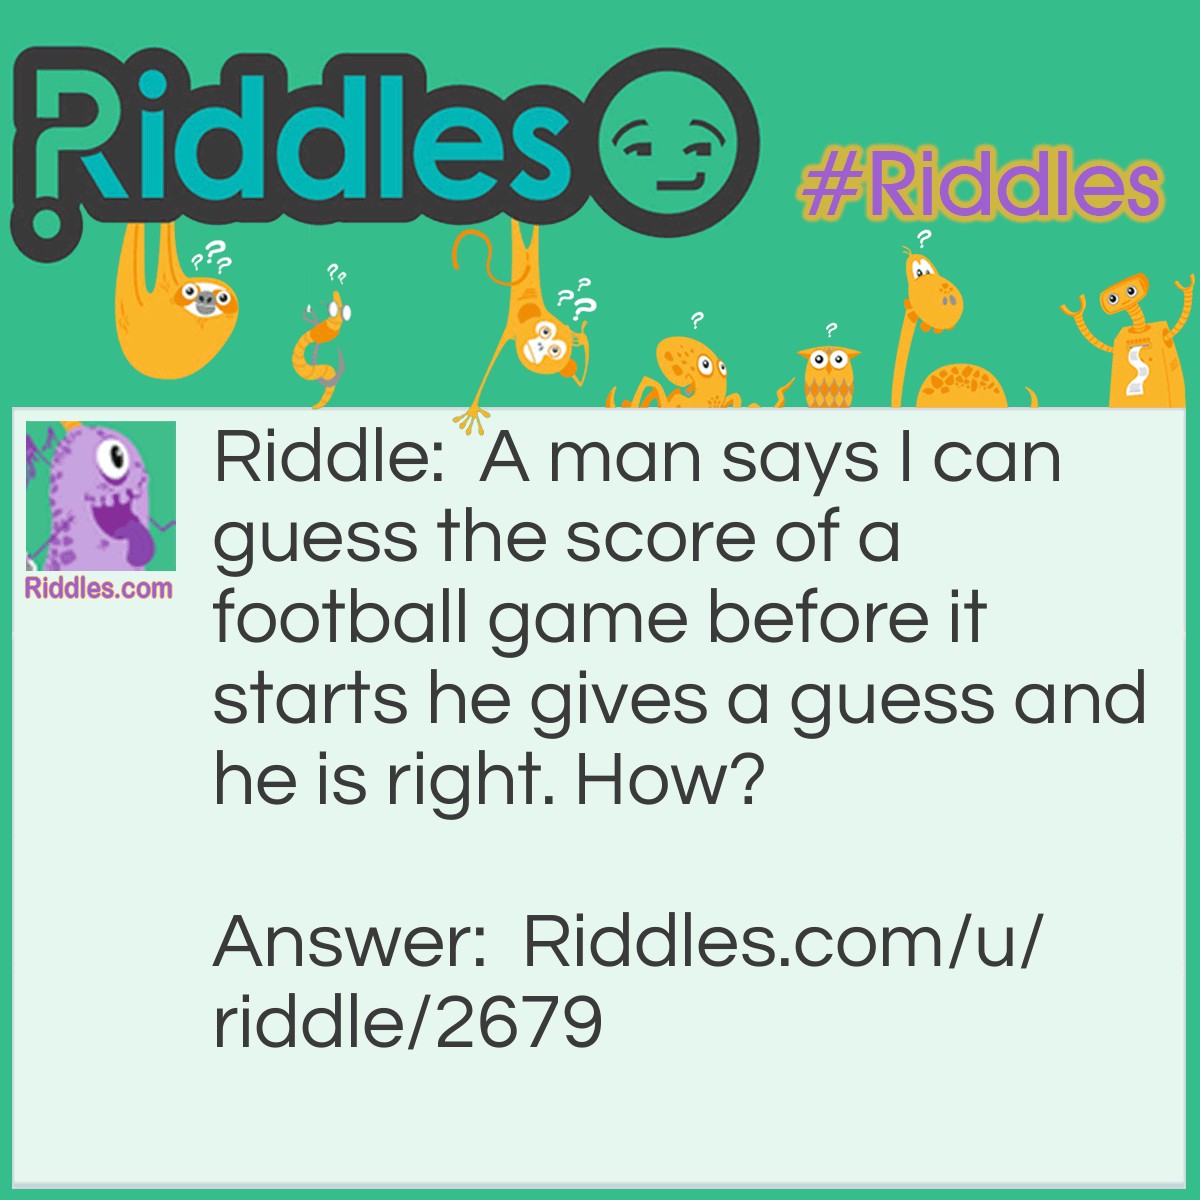 Riddle: A man says I can guess the score of a football game before it starts he gives a guess and he is right. How? Answer: The score is always 0-0 before the game starts.